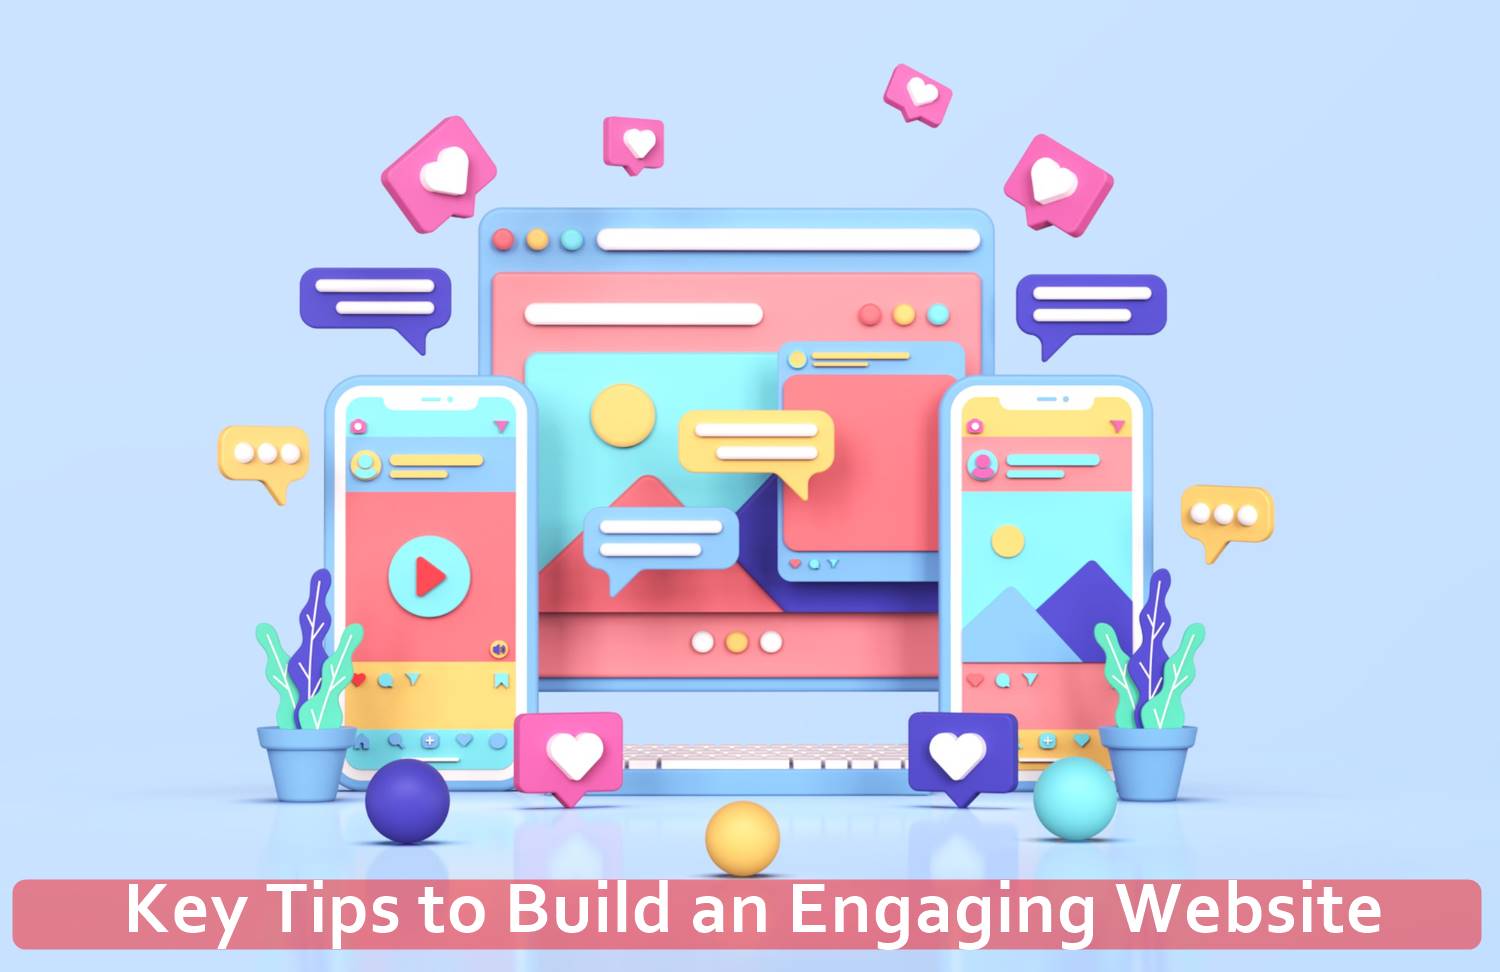 Key Tips to Build an Engaging Website